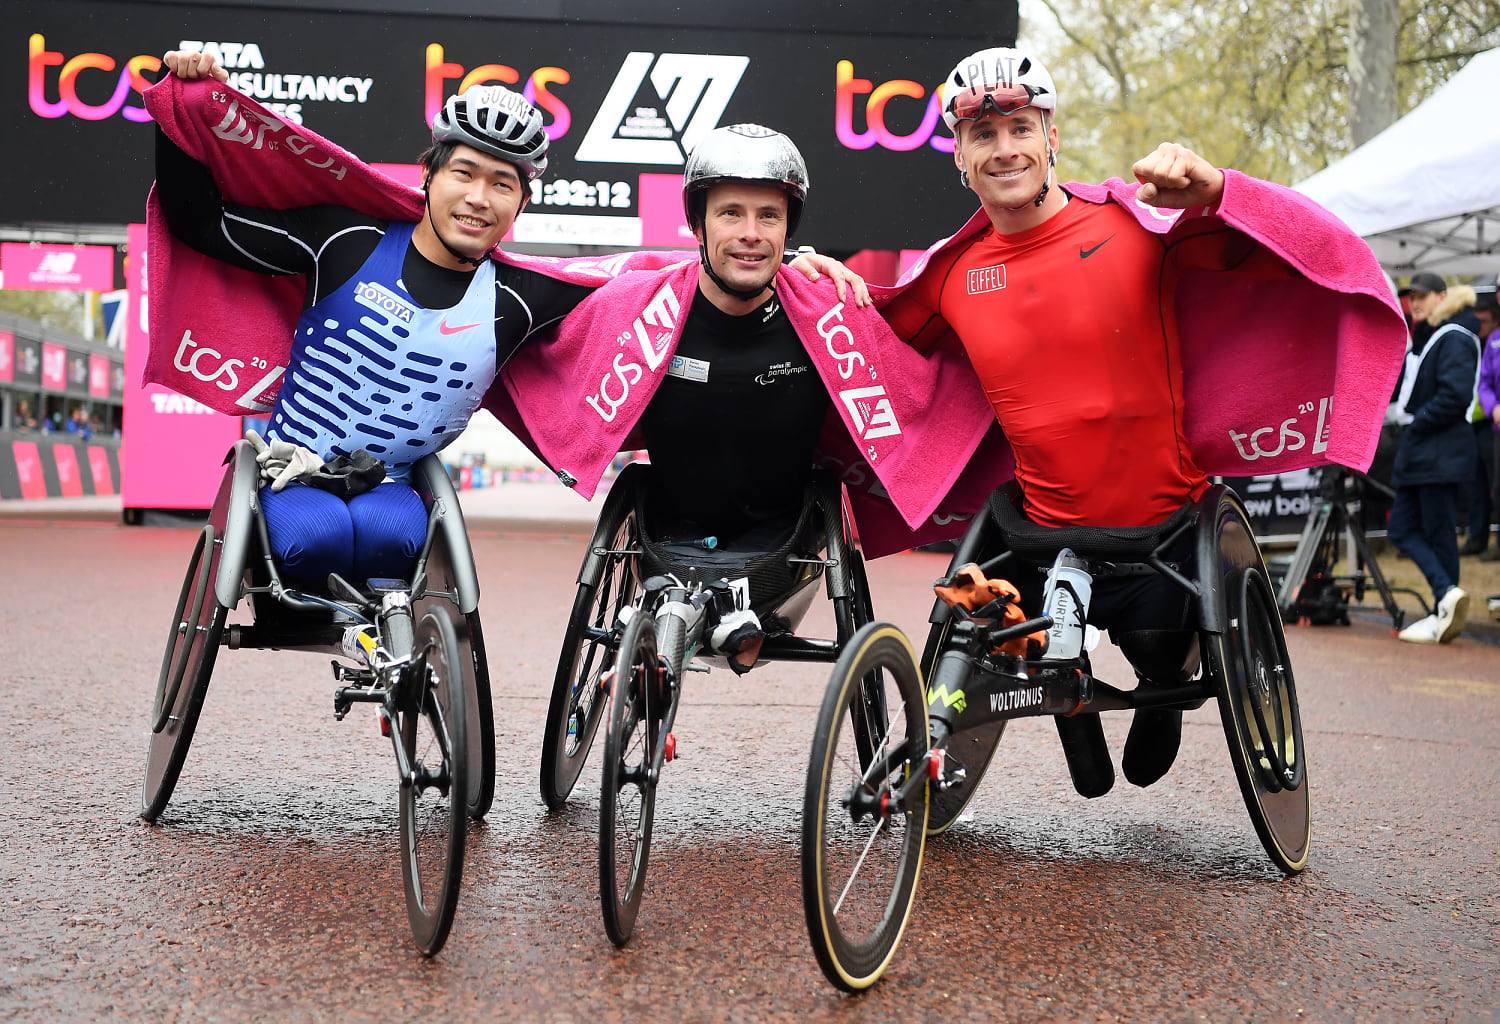 In a first, London Marathon to award wheelchair and non-disabledd athletes equal prize money